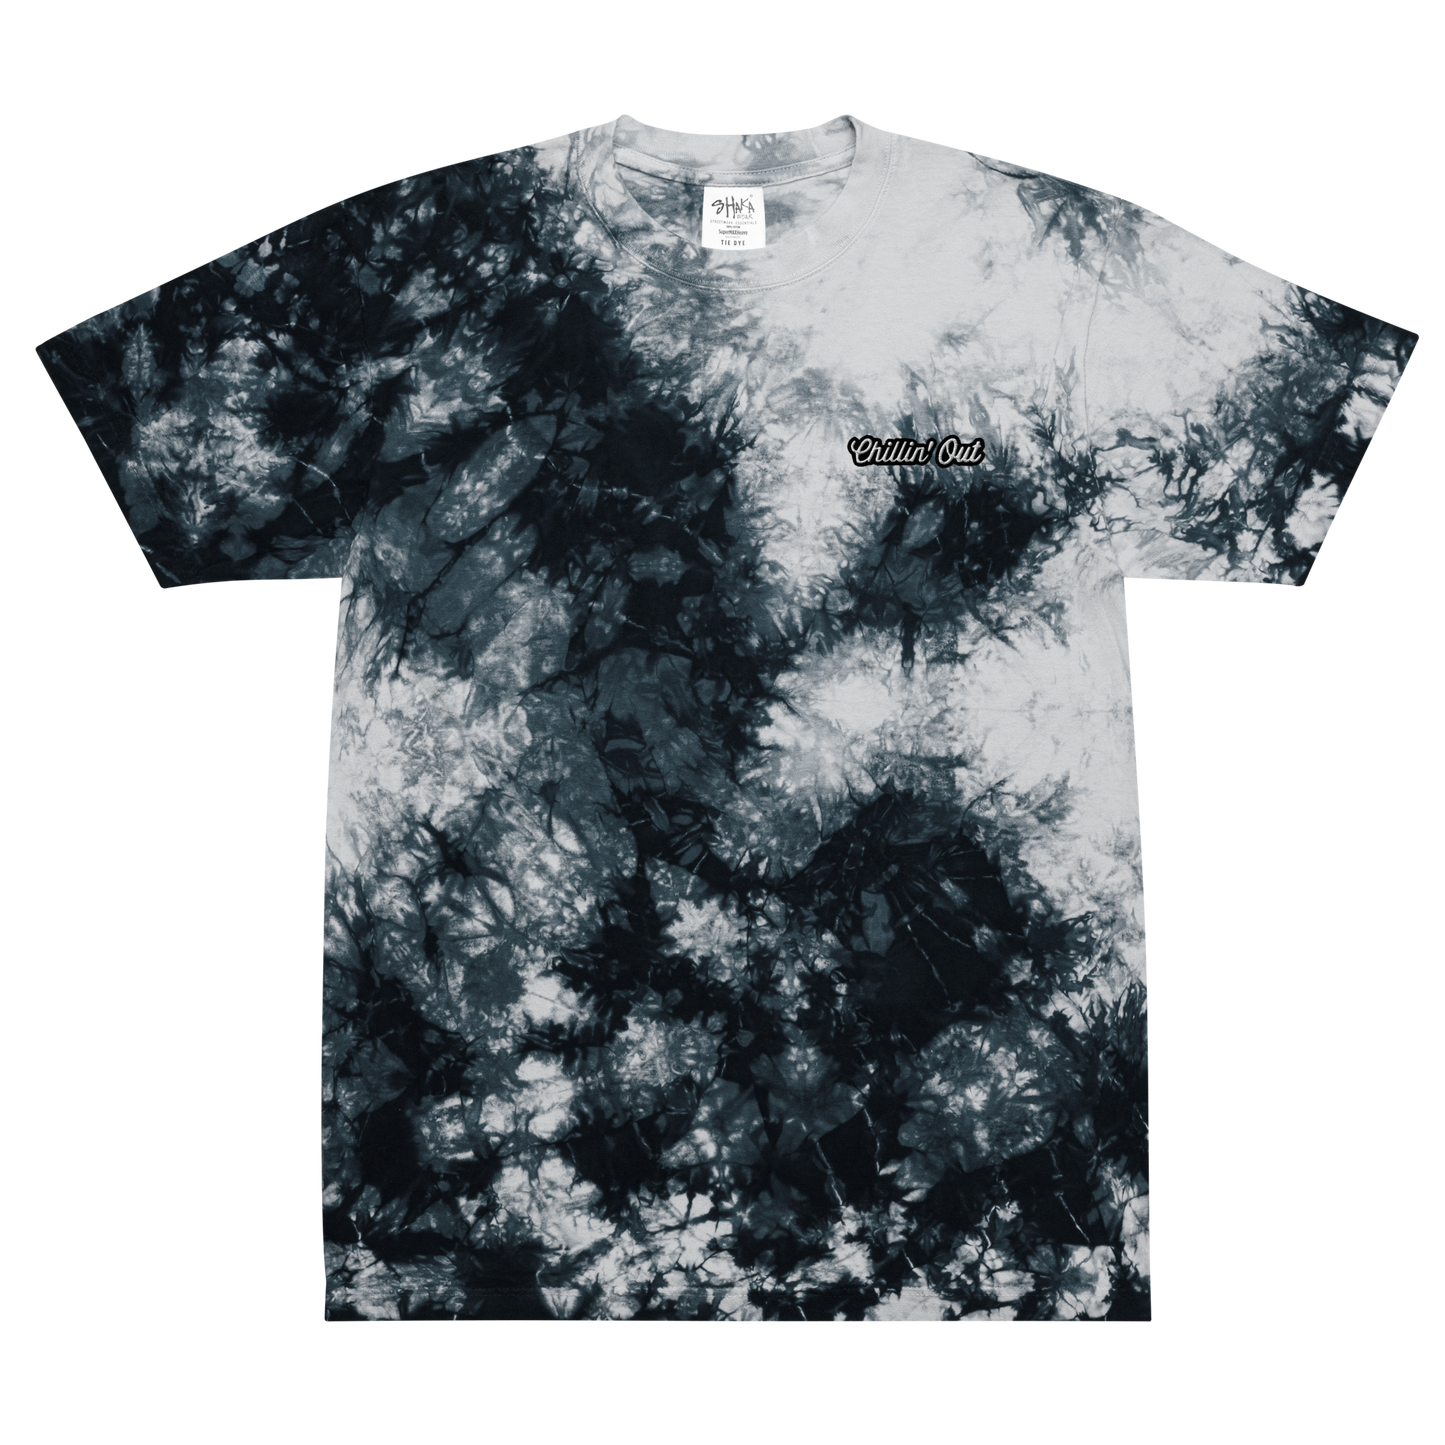 Chillin' Out - Embroidered - Tie Dye Tee - Unisex